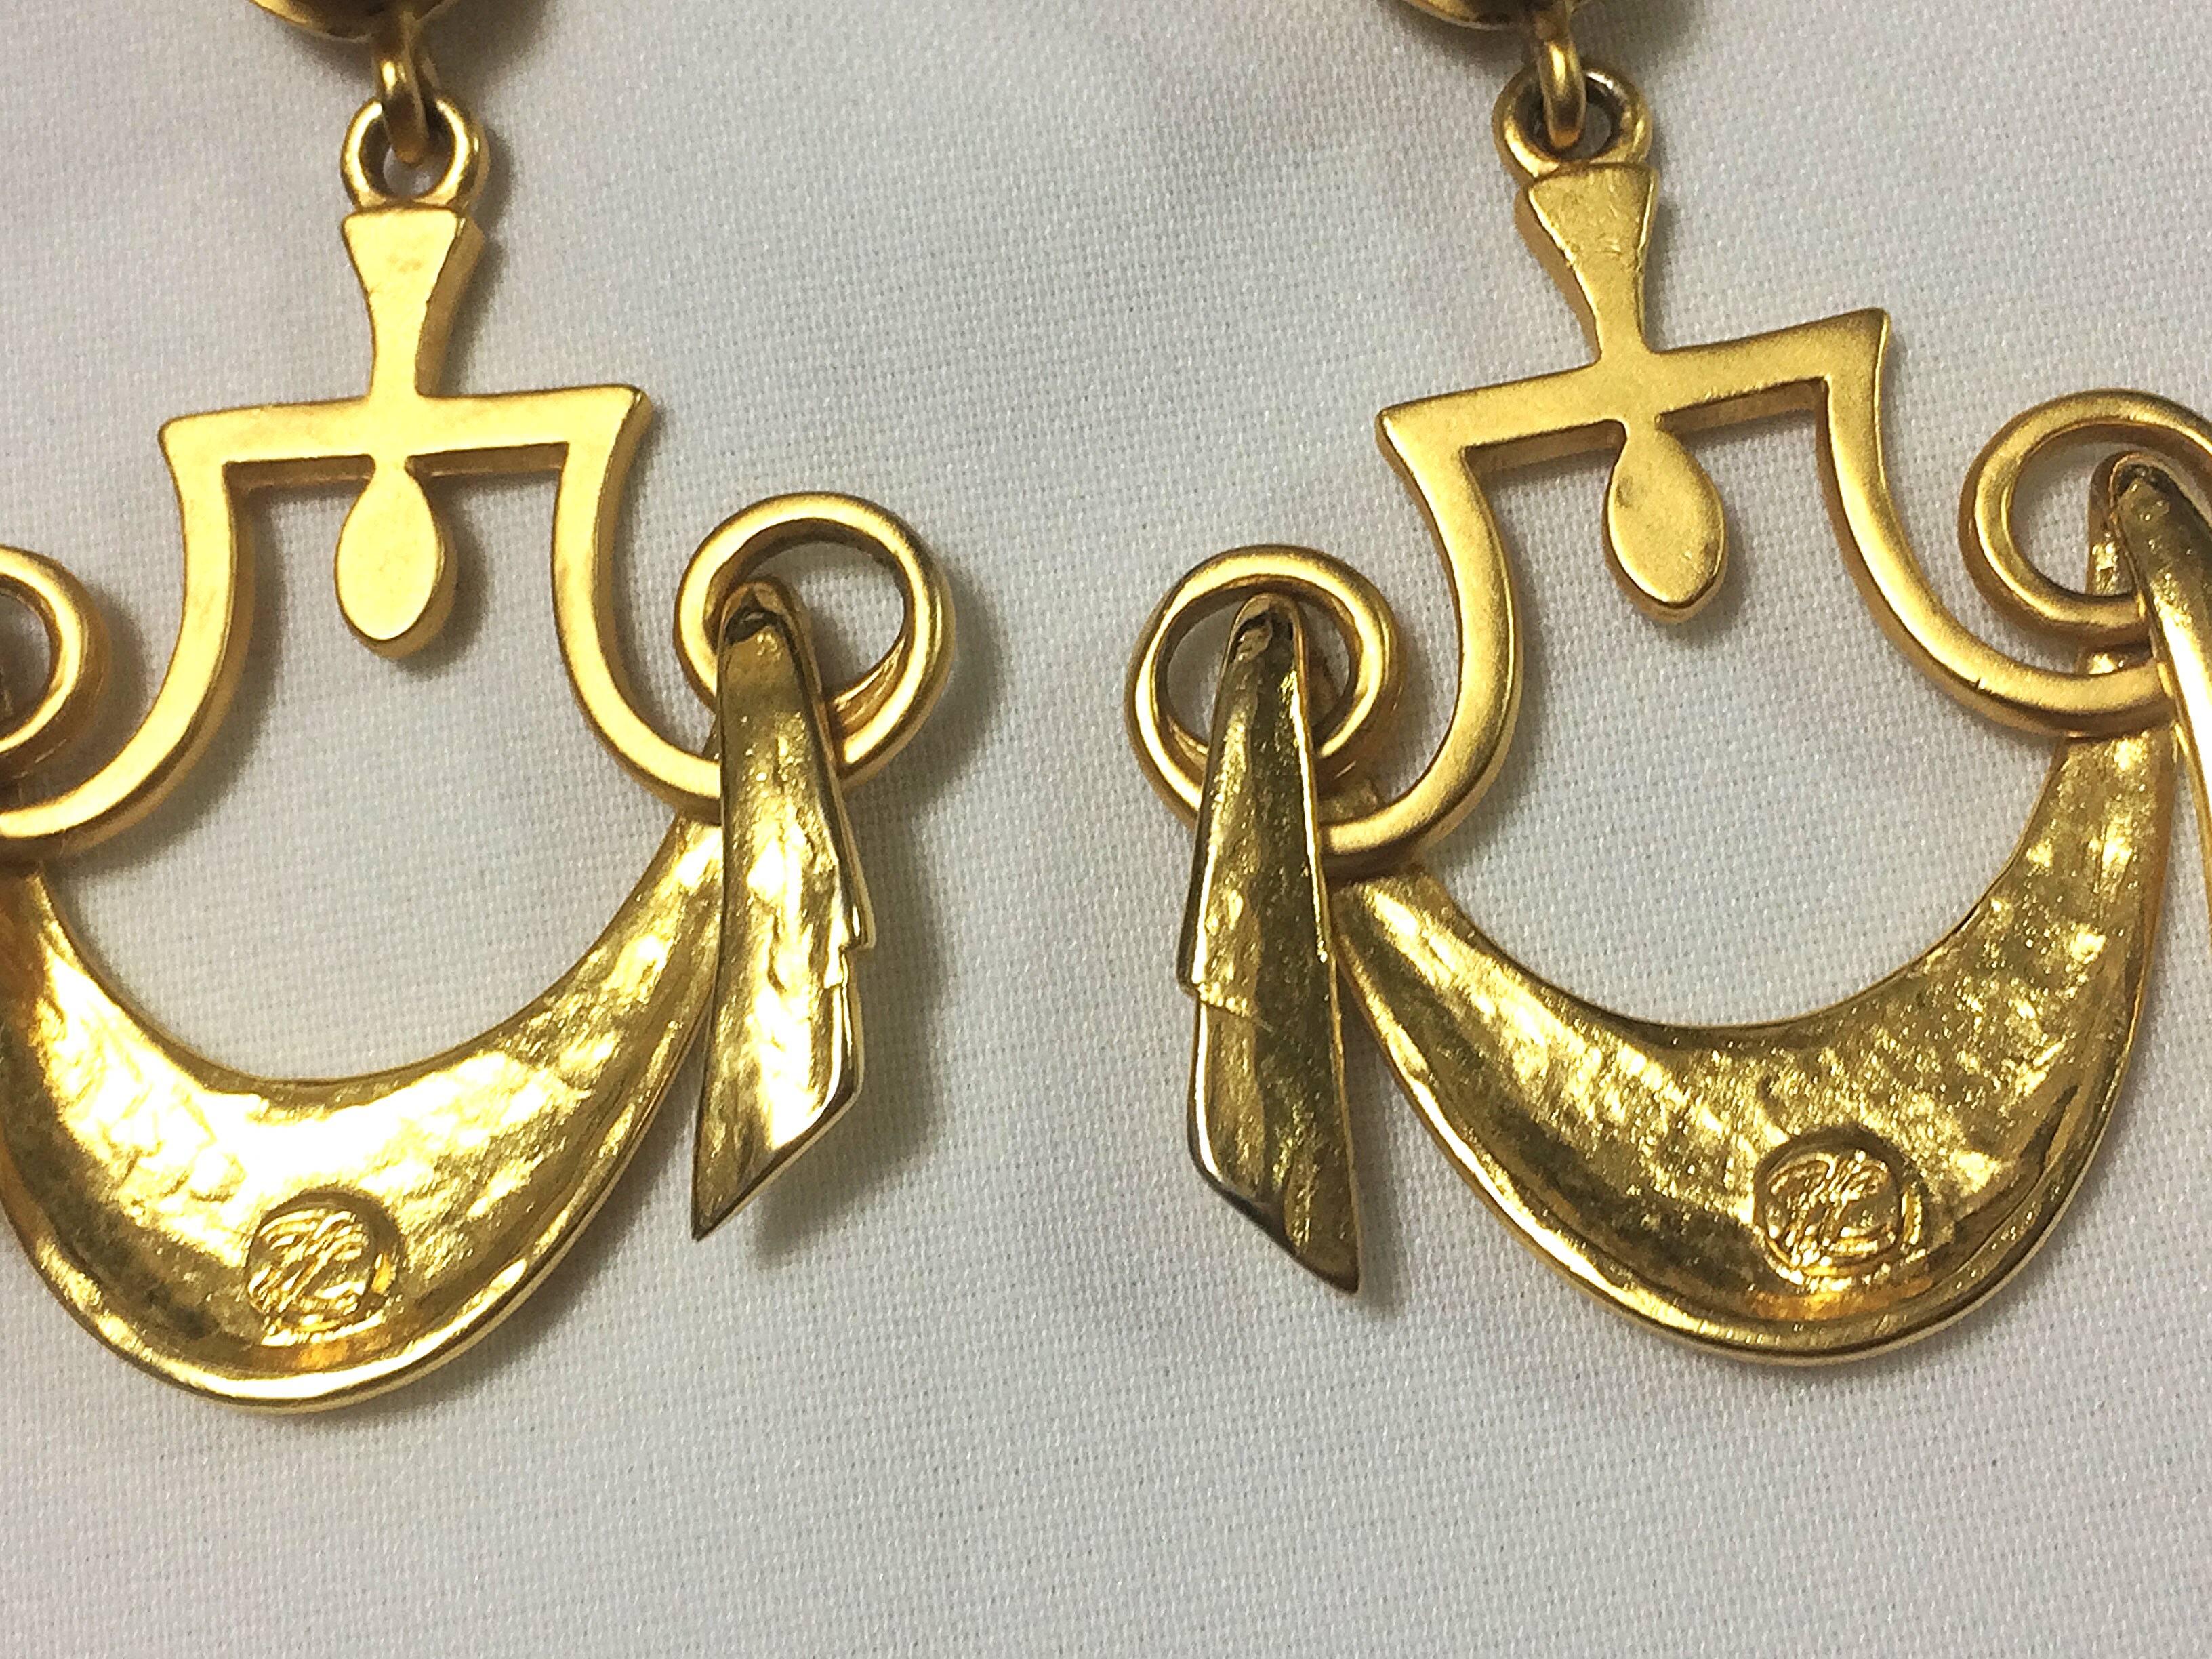 Vintage Karl Lagerfeld golden dangling earrings in drapery window curtain design In Excellent Condition For Sale In Kashiwa, Chiba